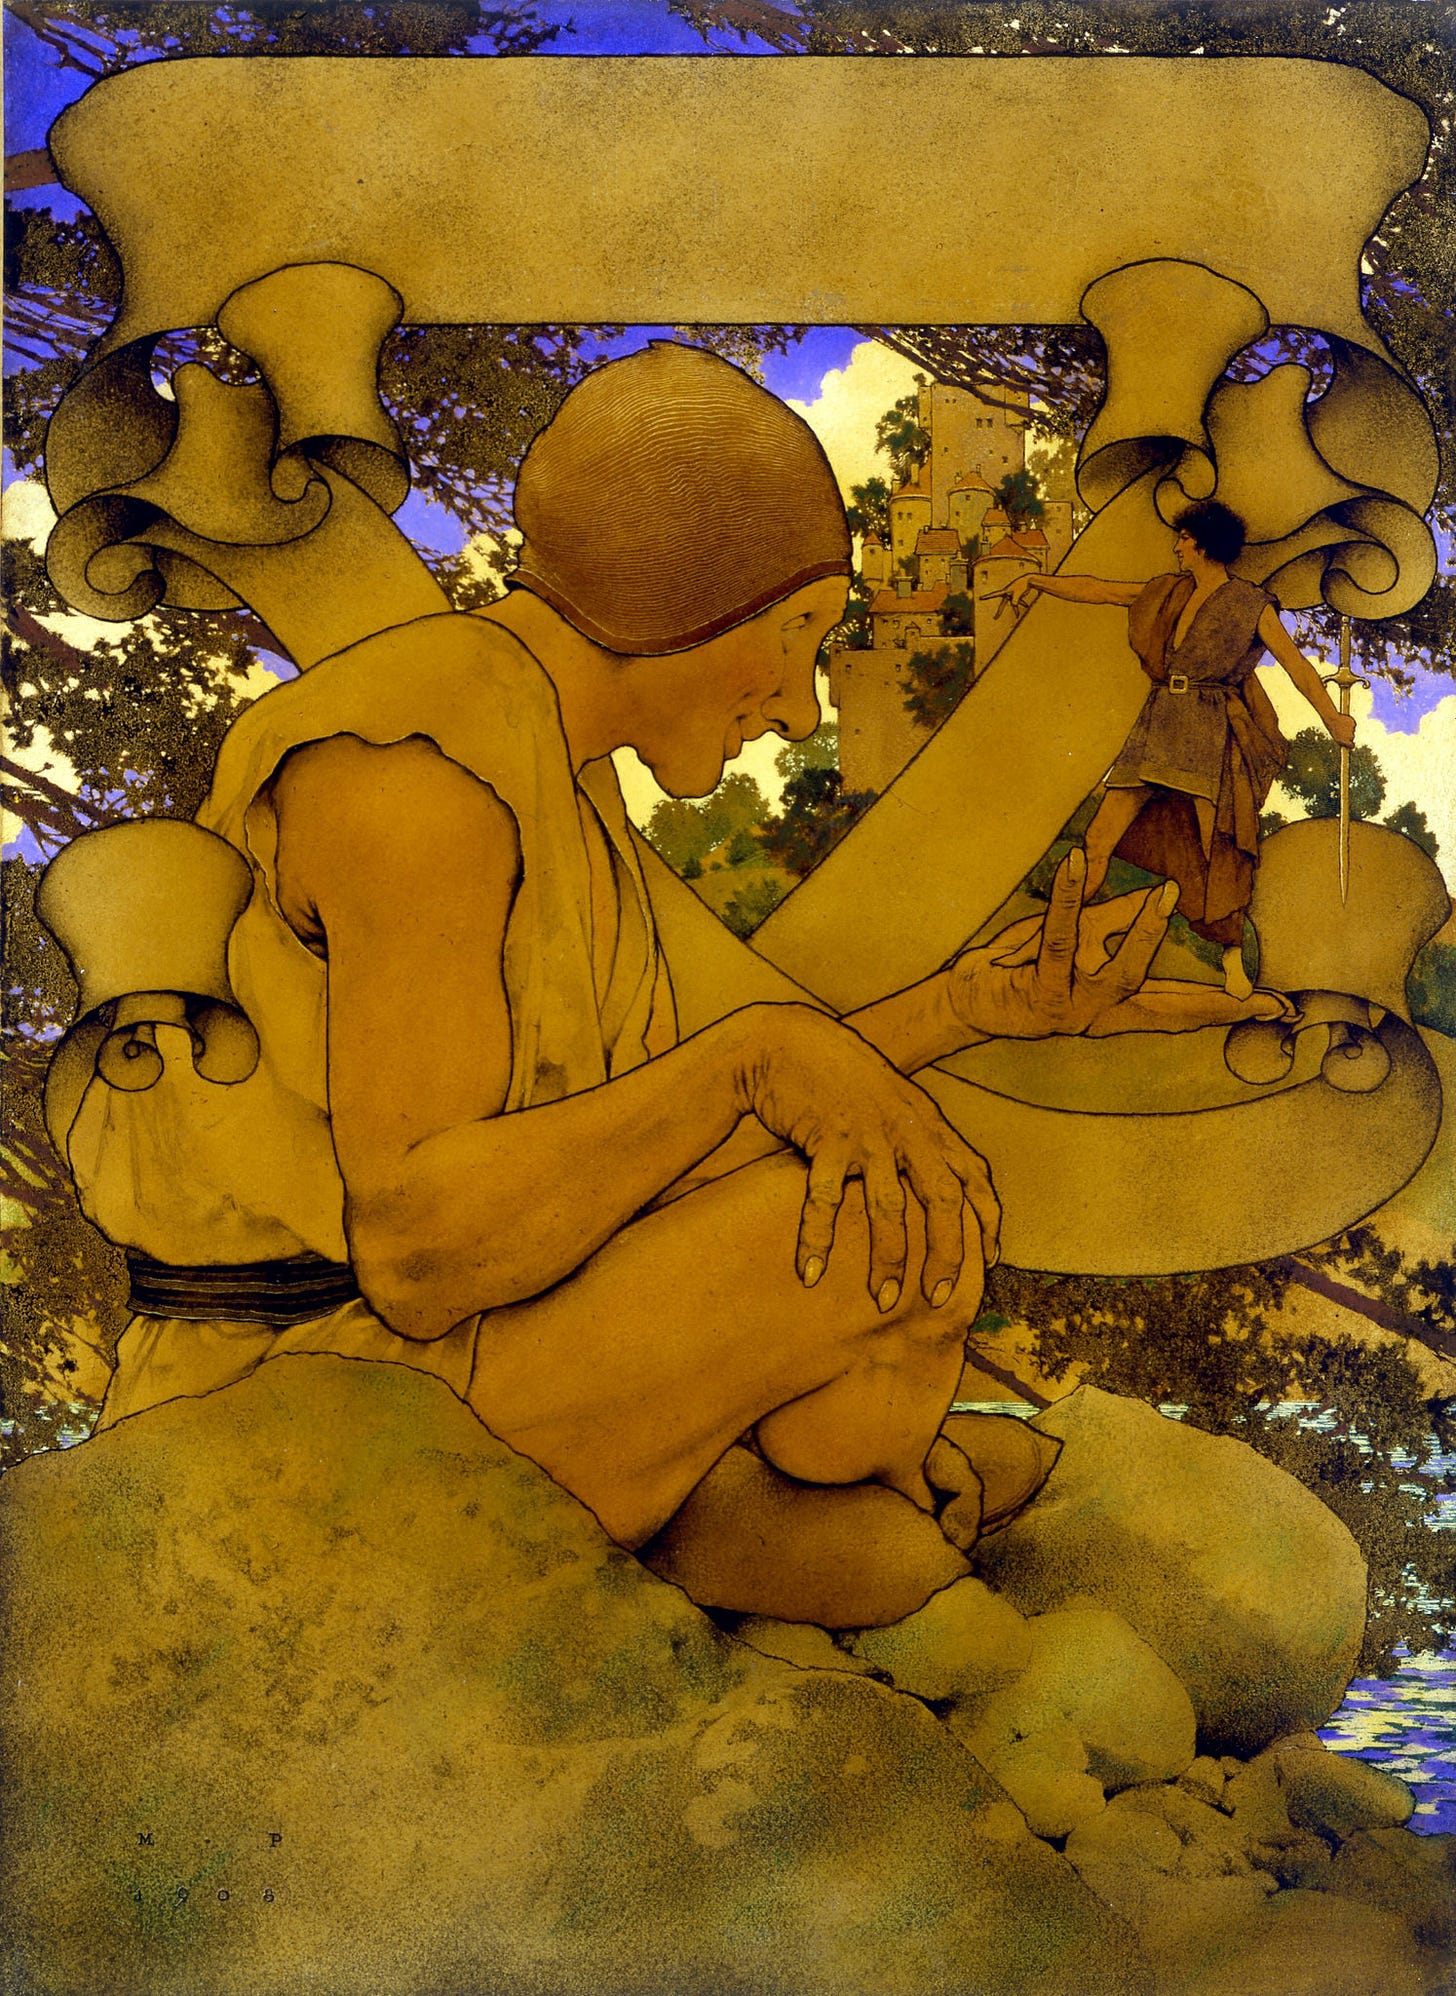 The Art of Maxfield Parrish - The New York Times